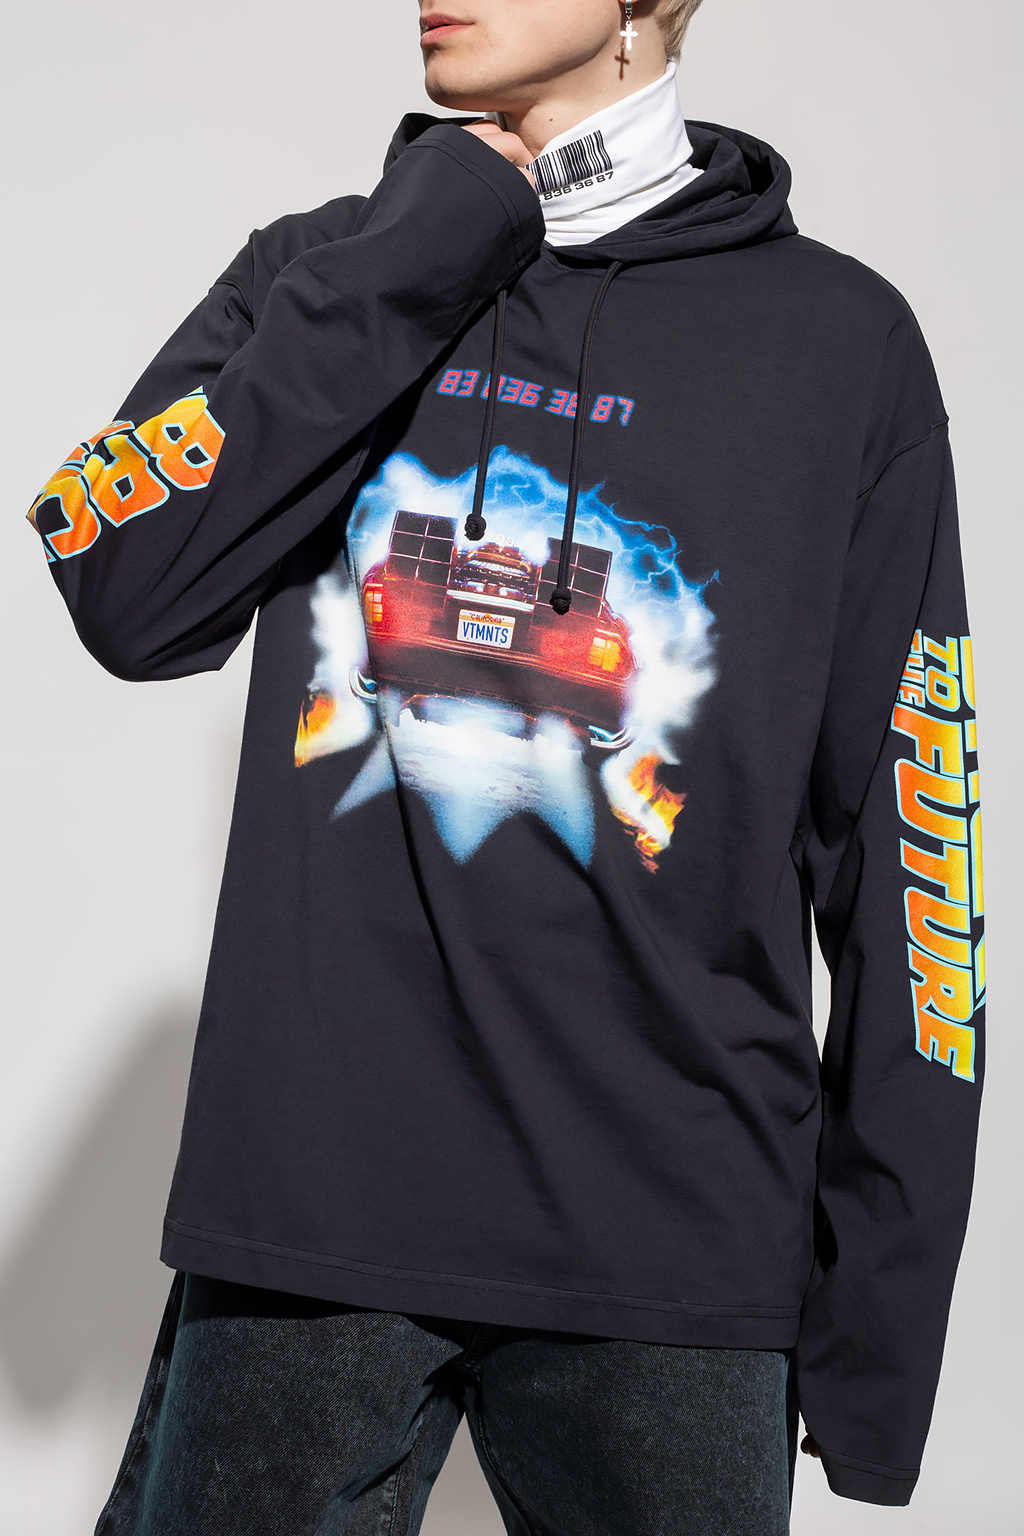 Black Hoodie with 'Back to the Future' print VTMNTS - Vitkac